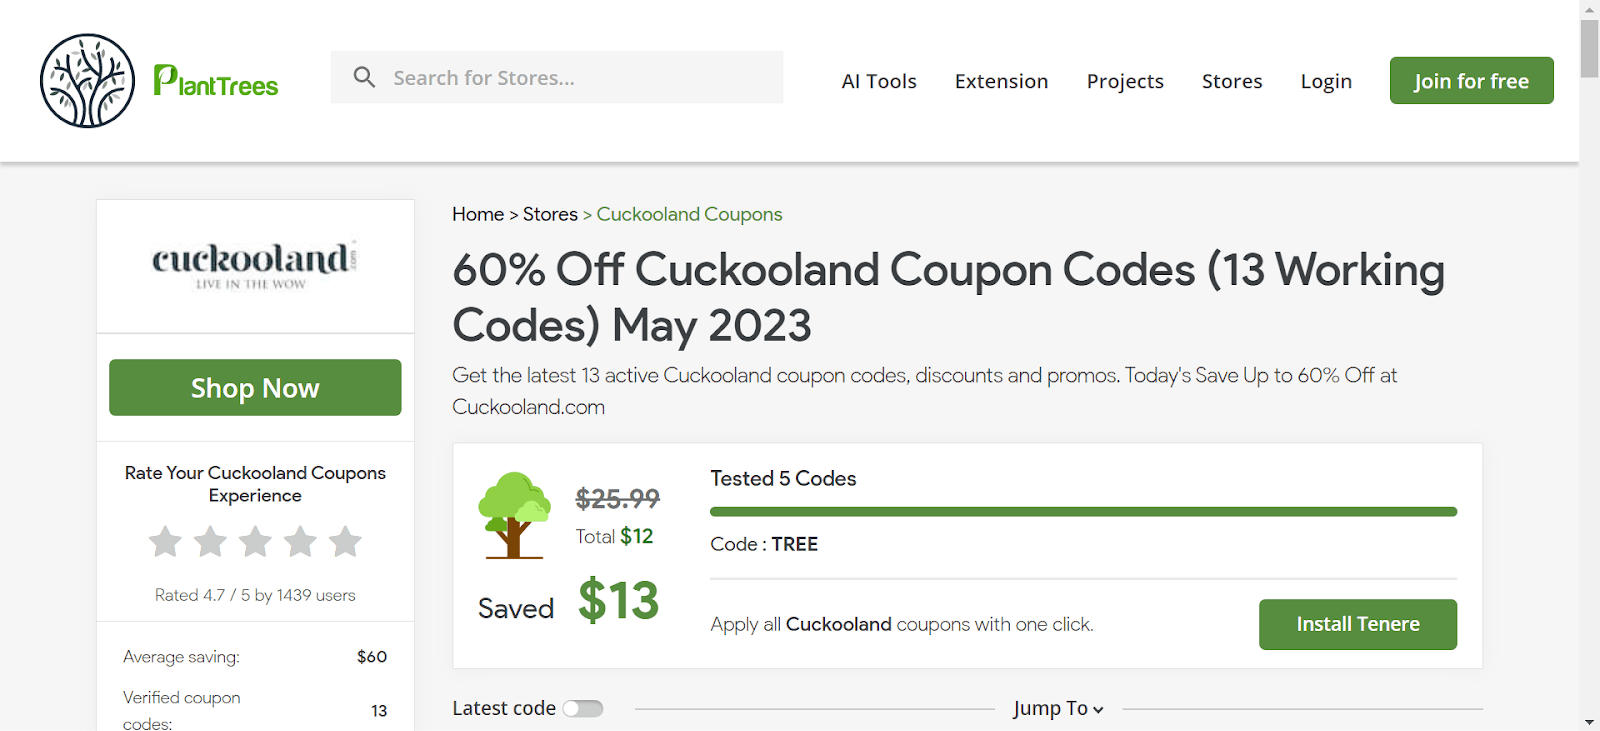 How To Use Cuckooland Discount Code 3